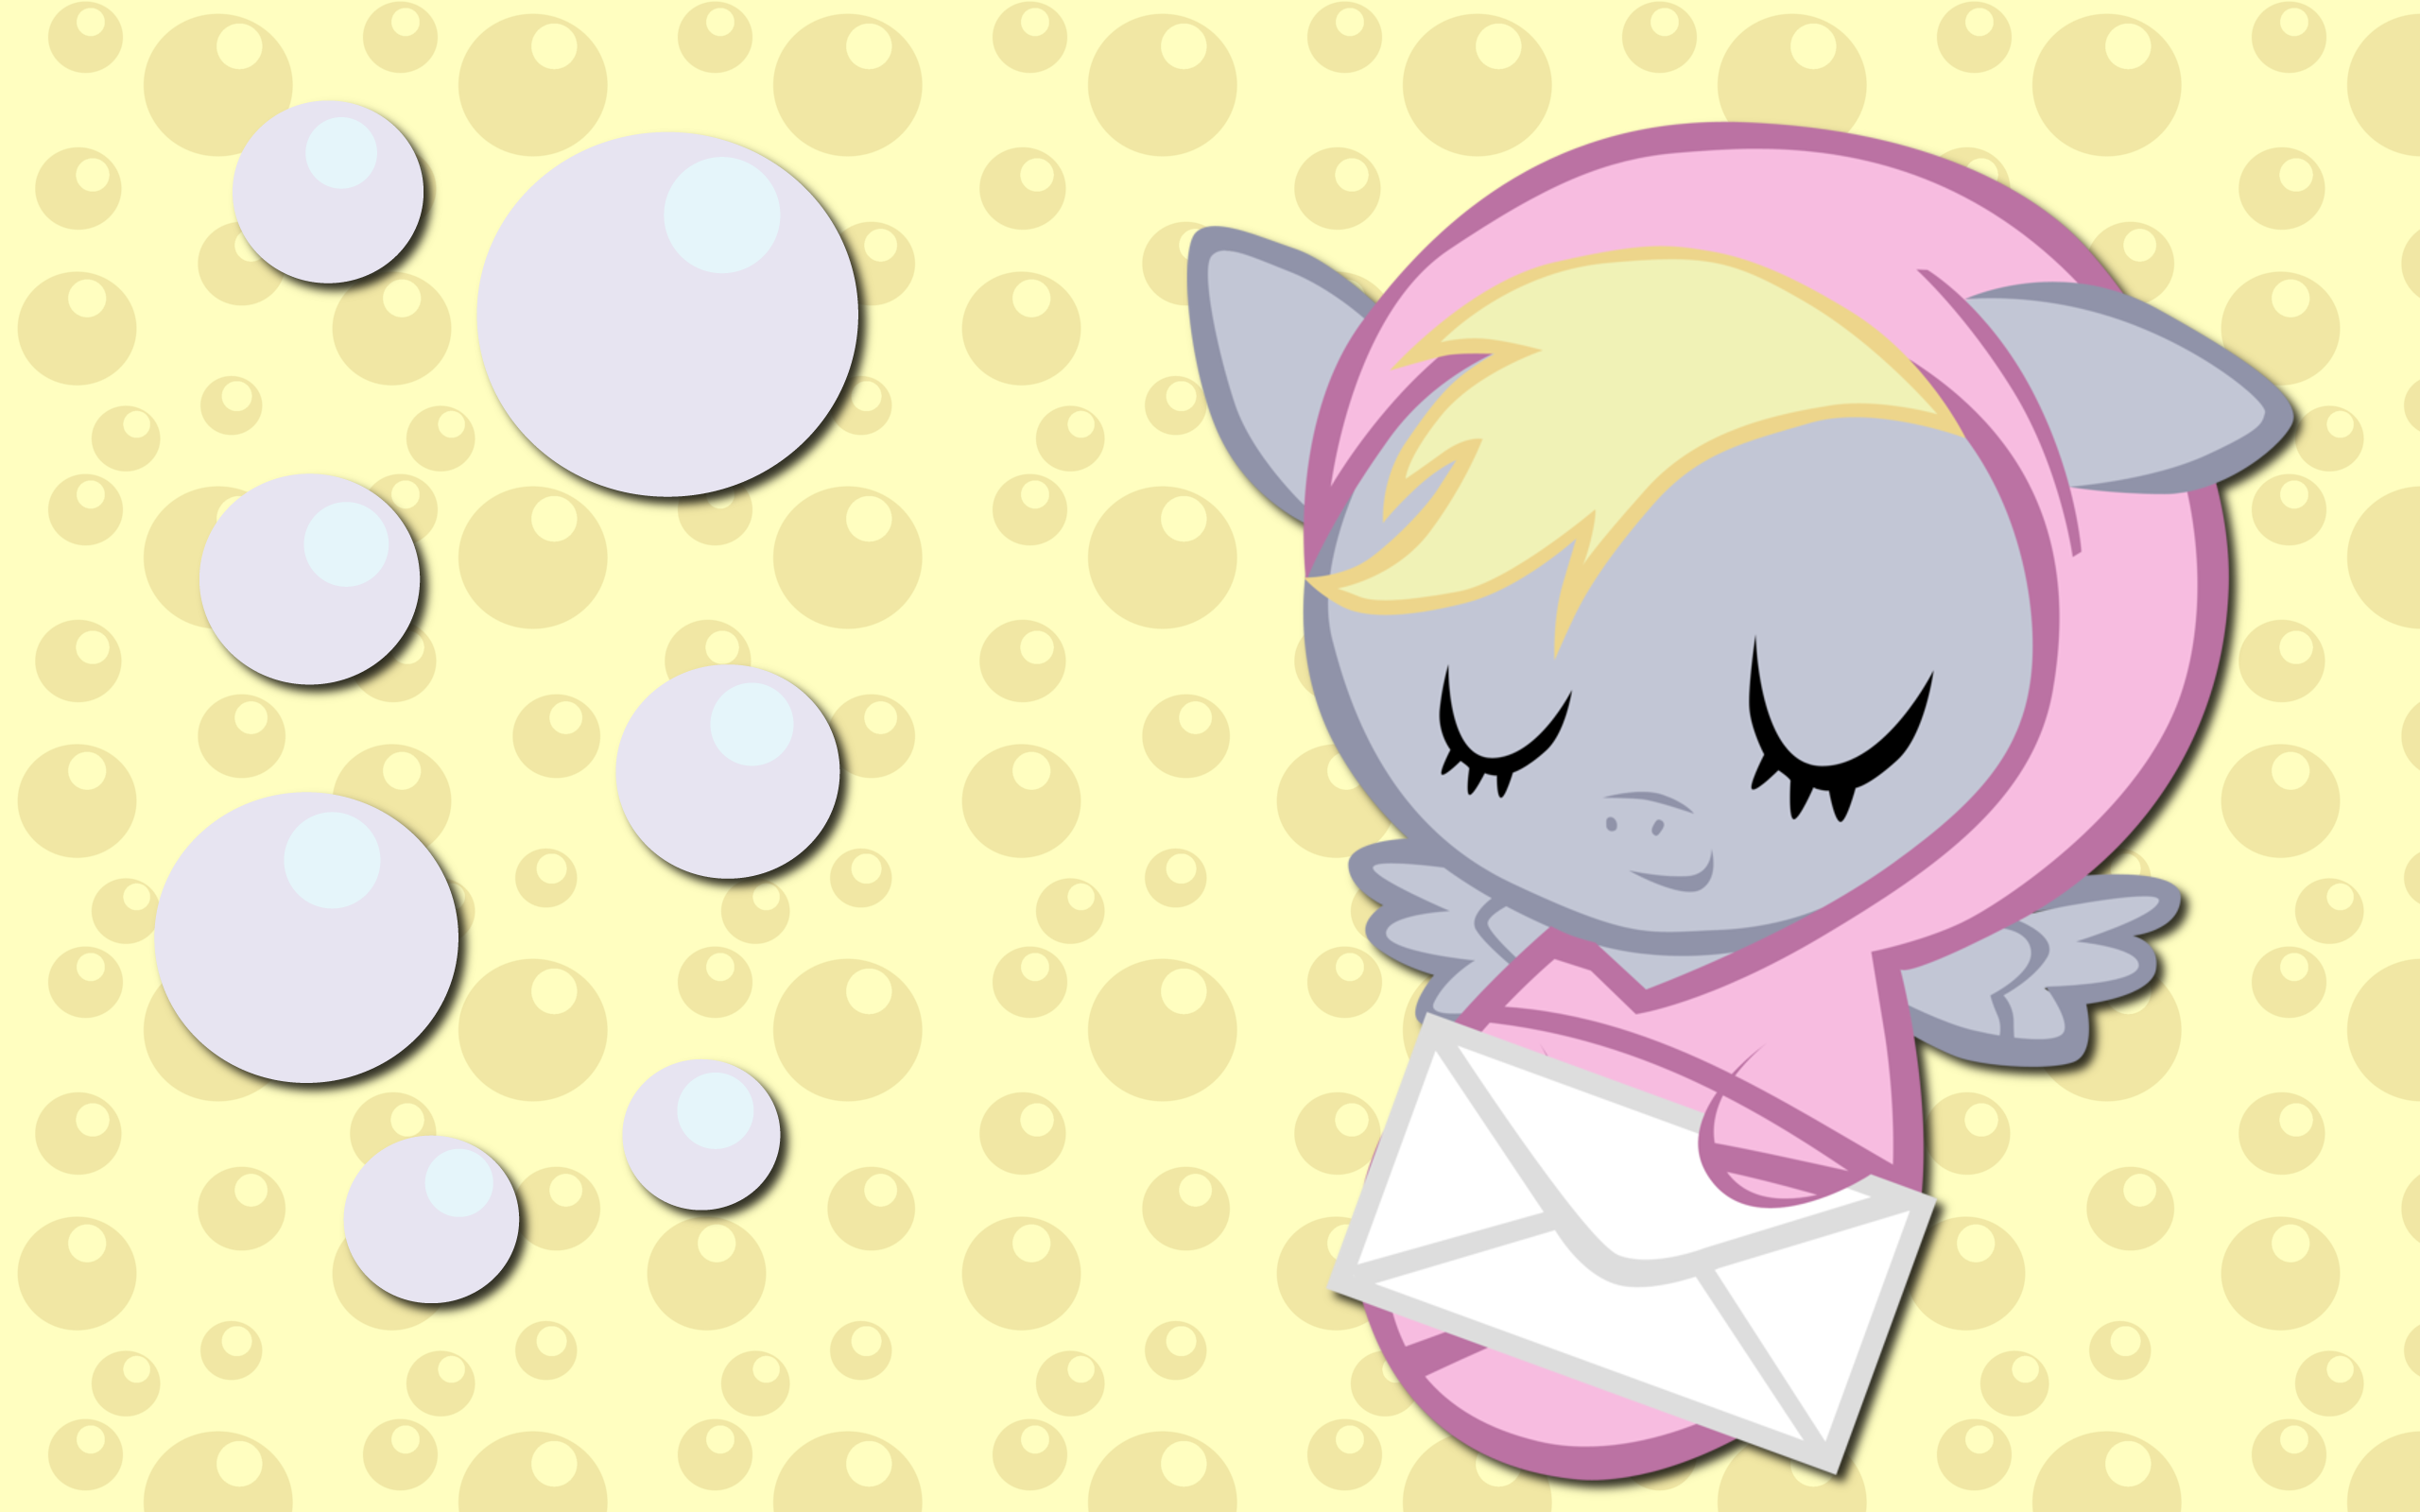 New Born Derpy Hooves WP by AliceHumanSacrifice0, atnezau and ooklah